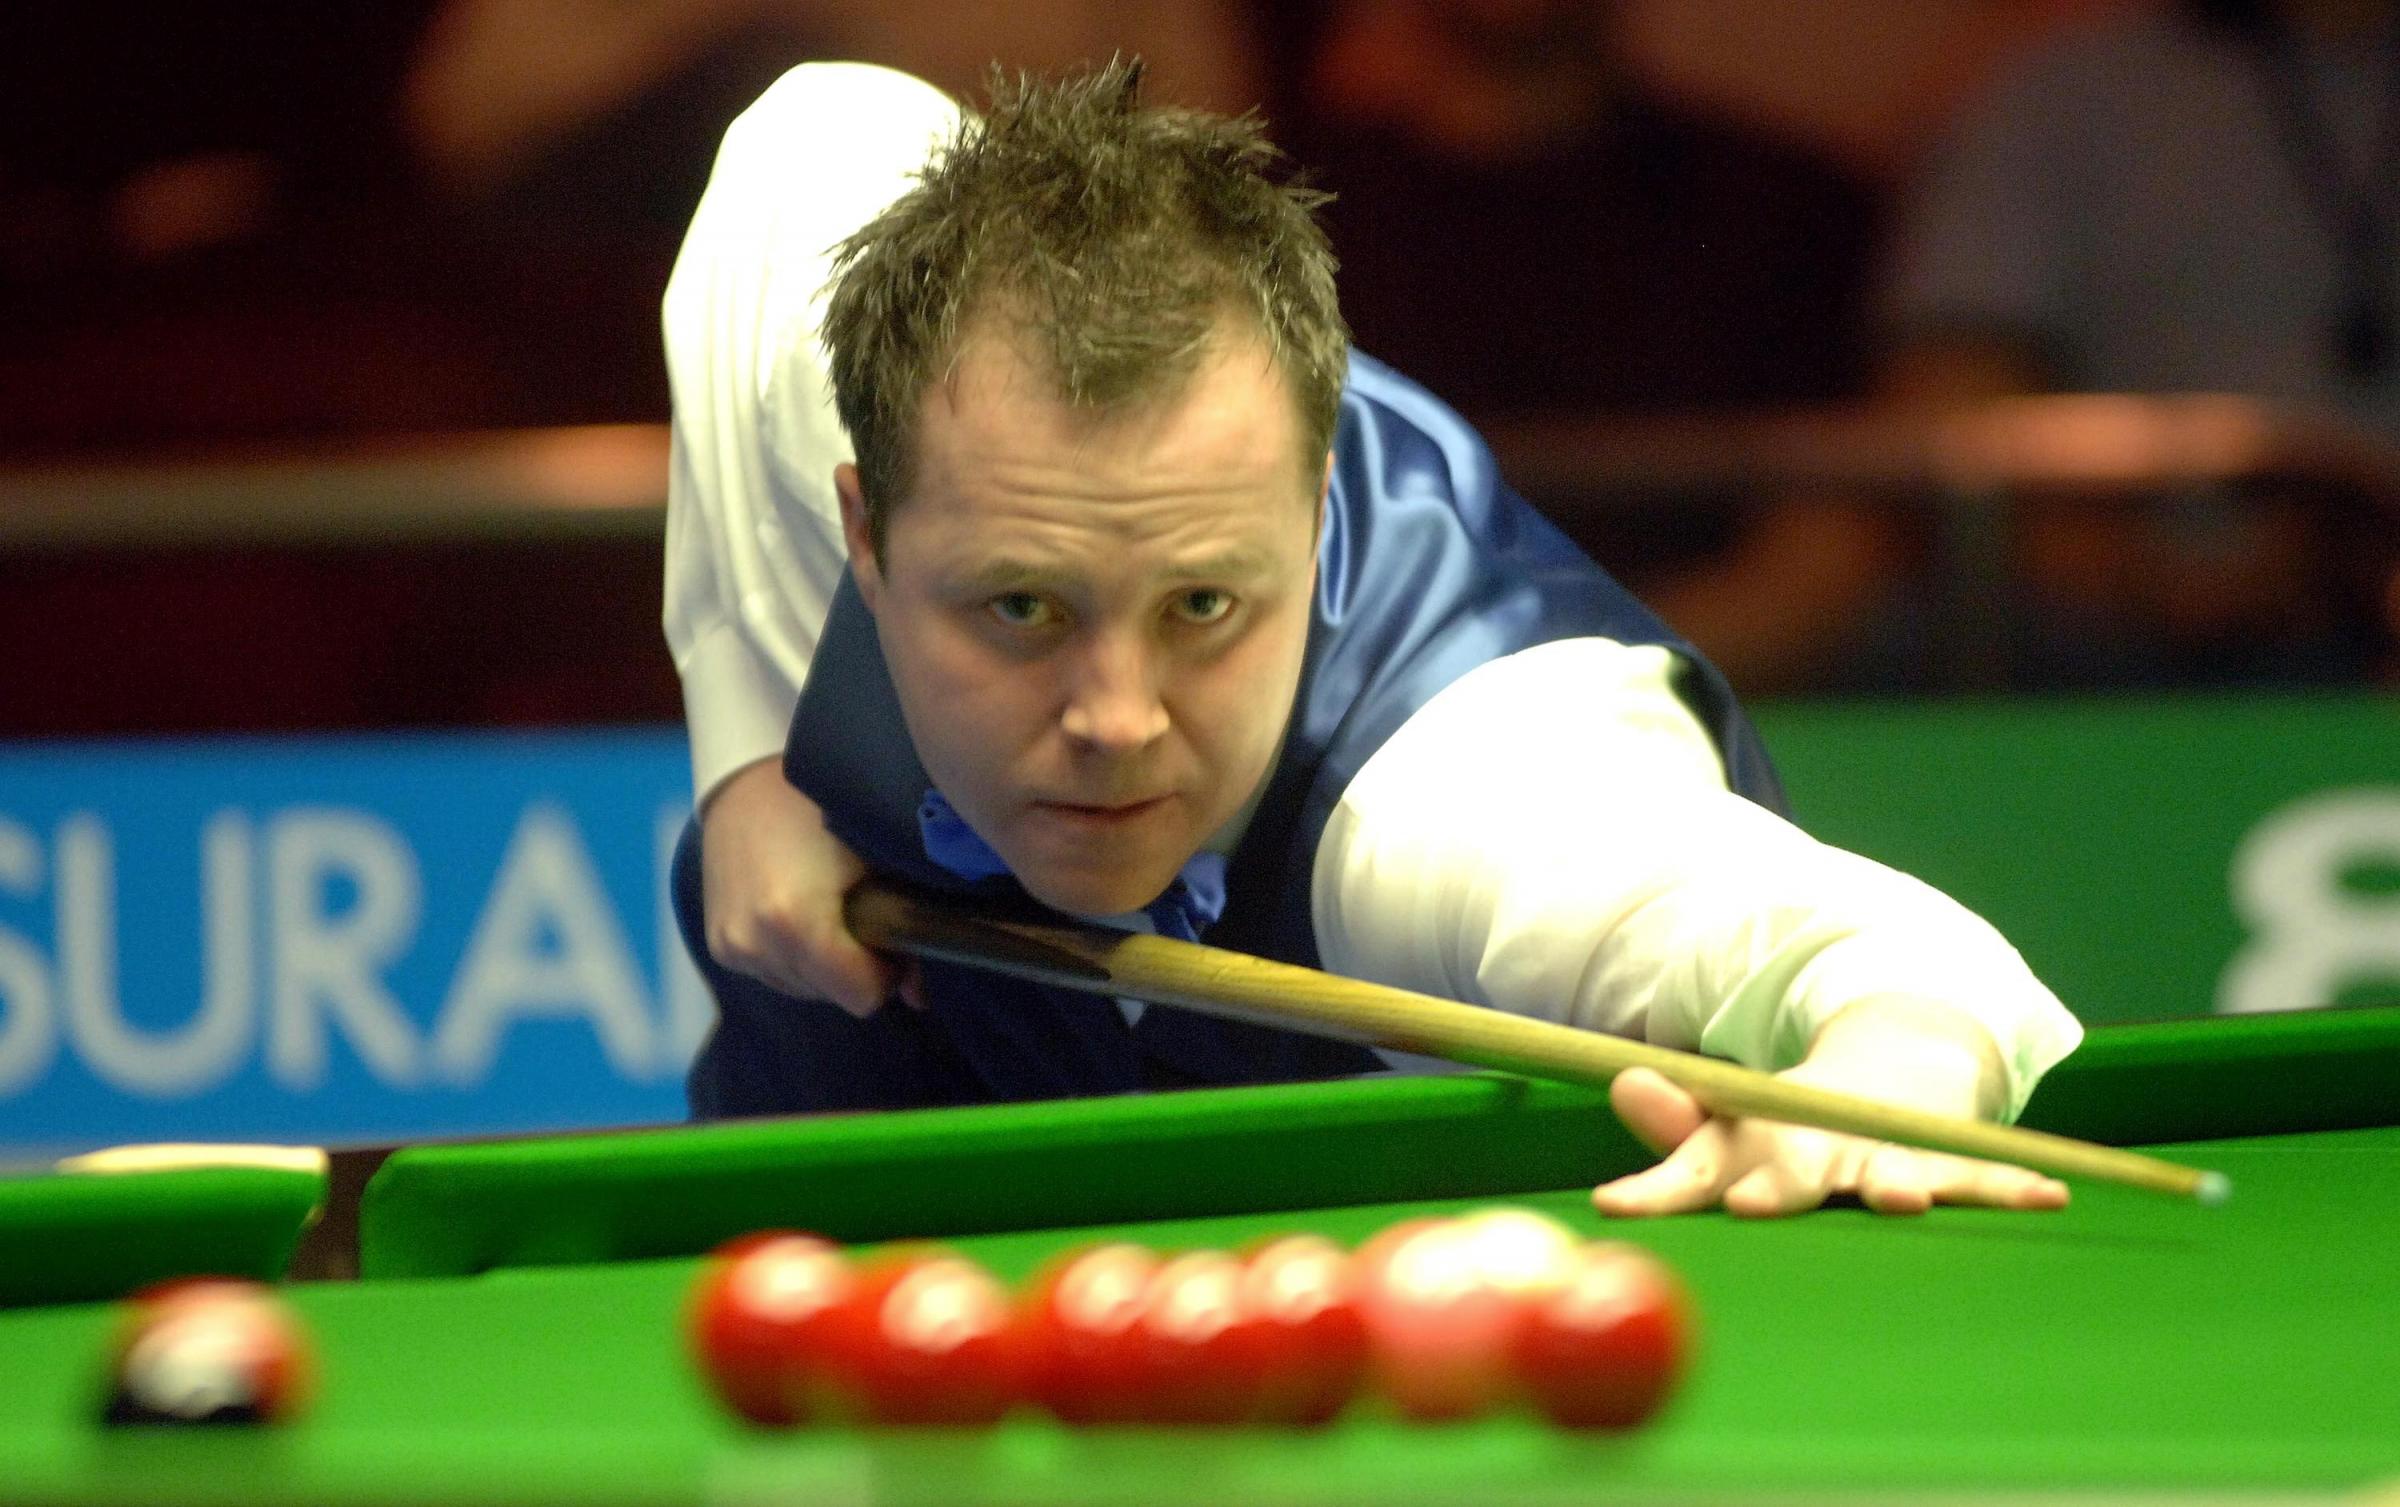 Snooker ace John Higgins to make special Bury appearance - Bury Times